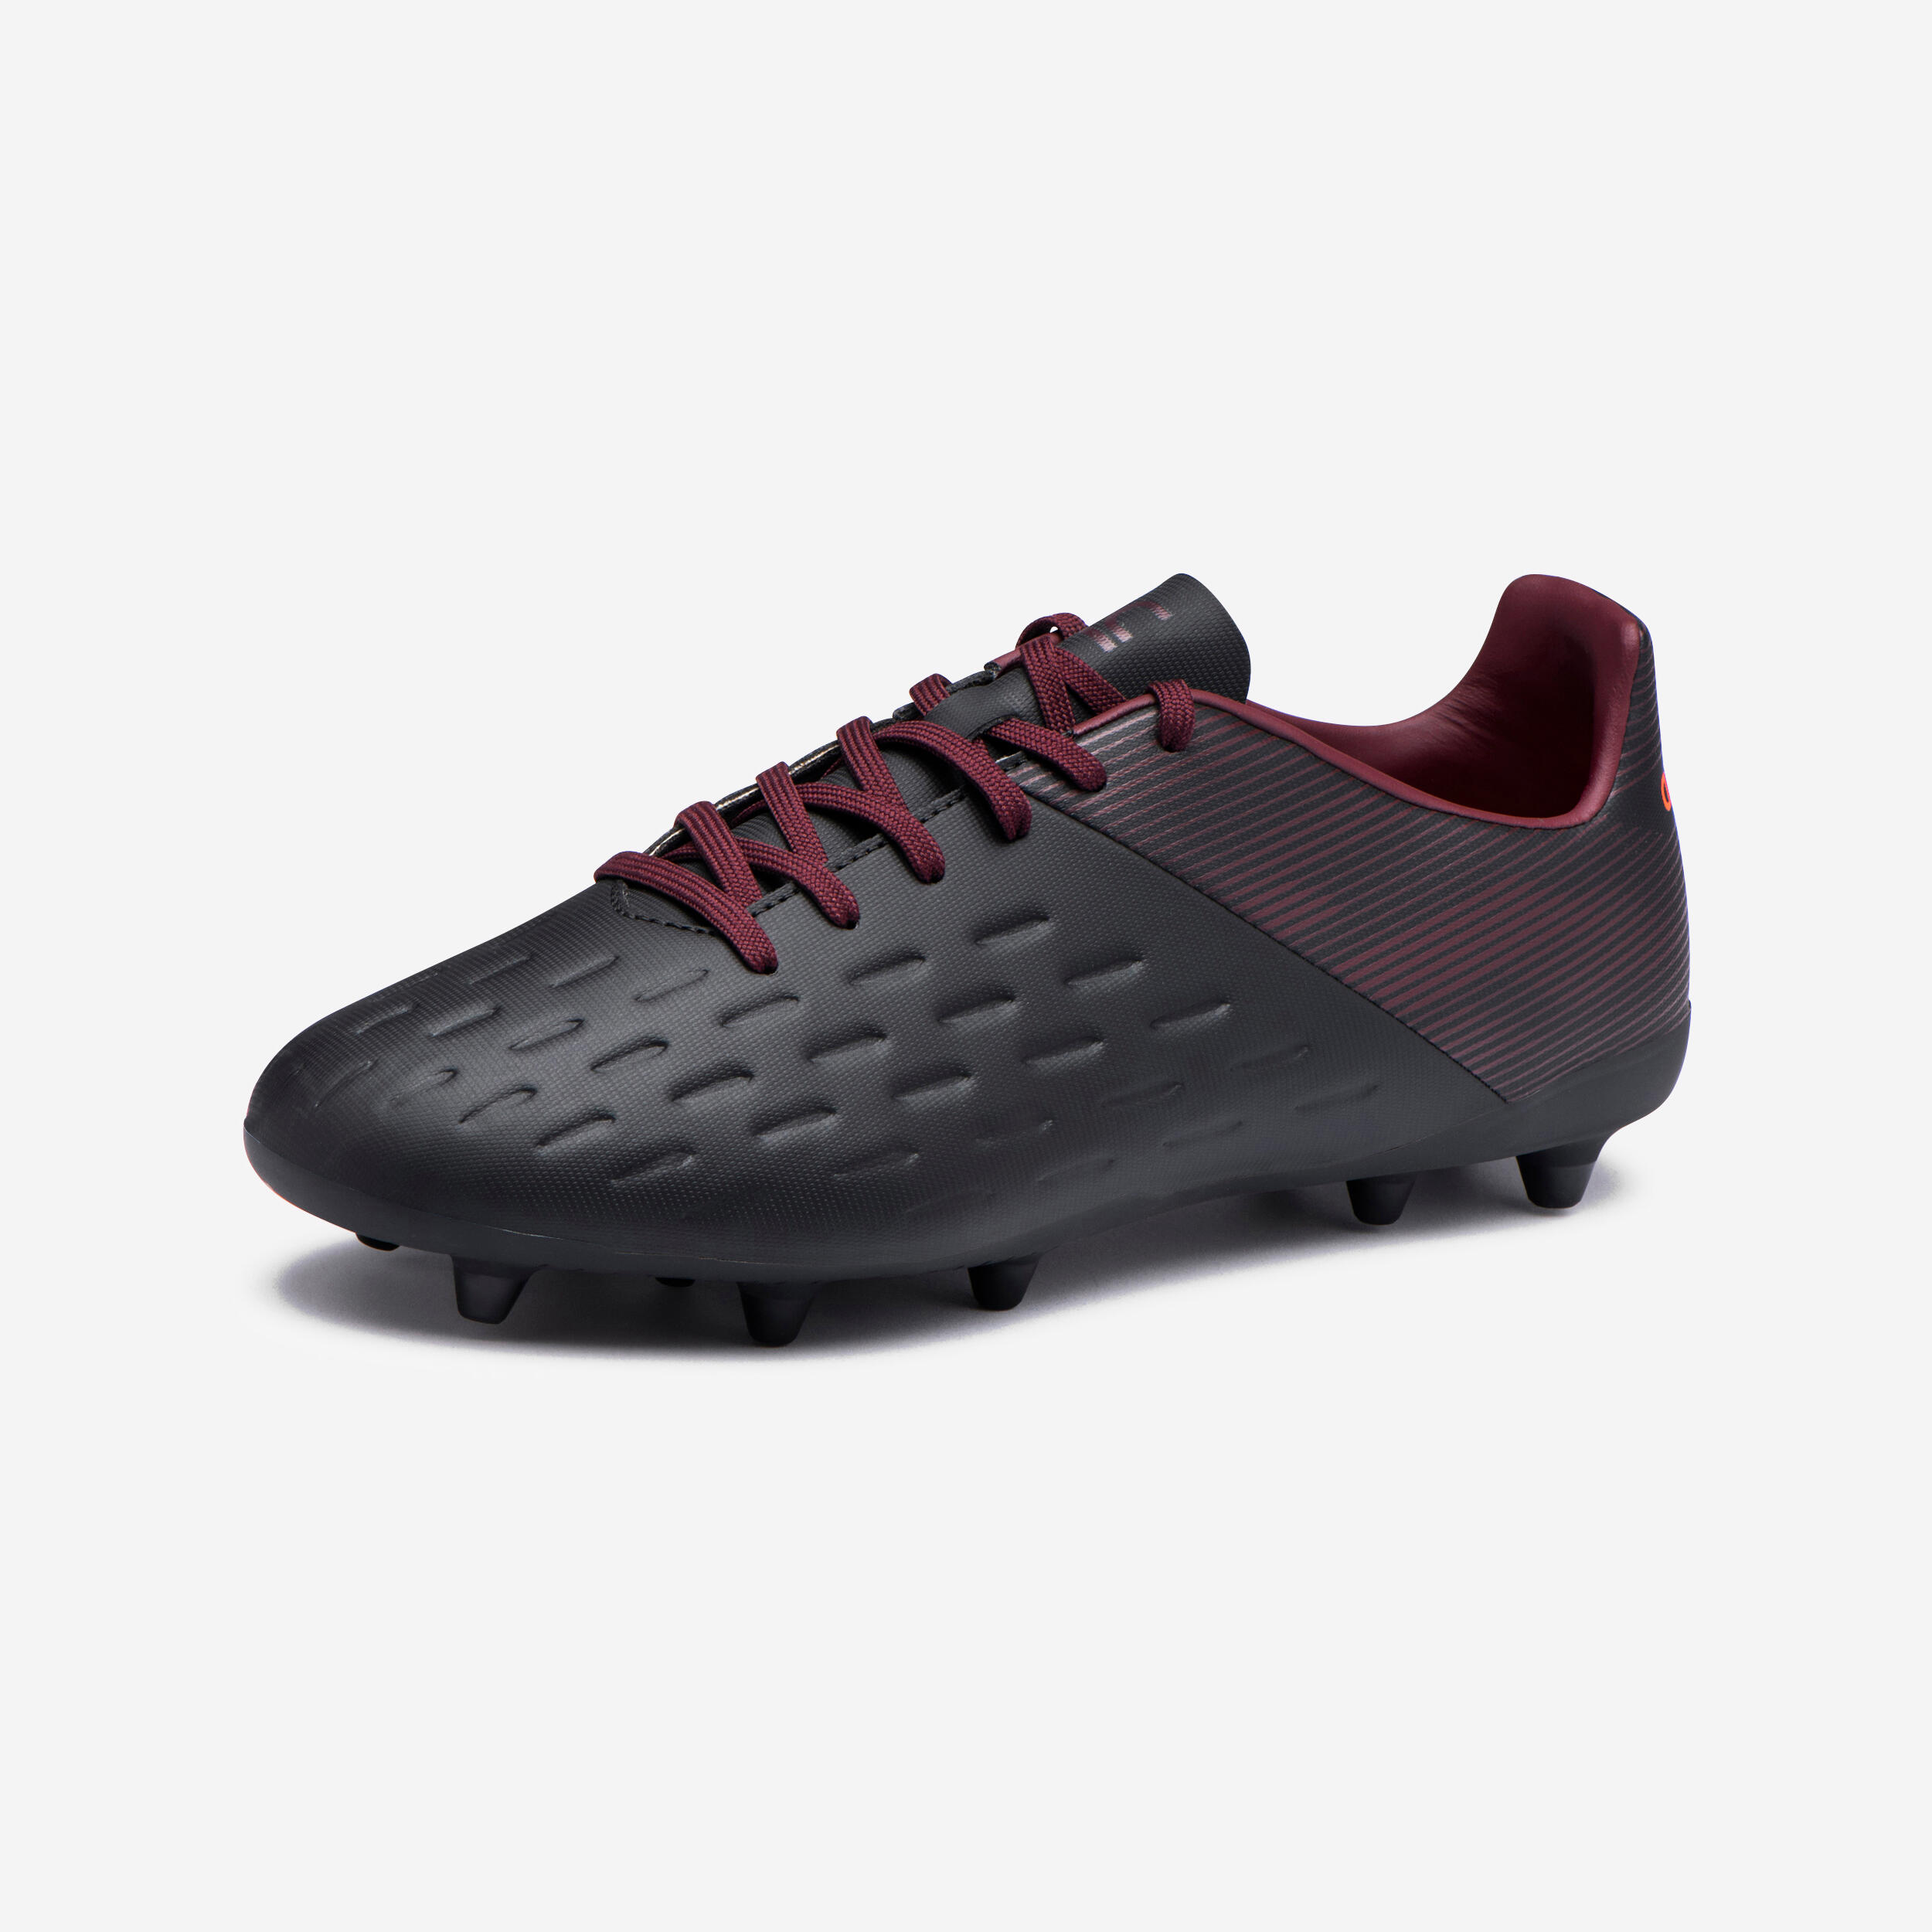 OFFLOAD Men's Moulded Dry Pitch Rugby Boots Advance R100 FG - Black/Burgundy